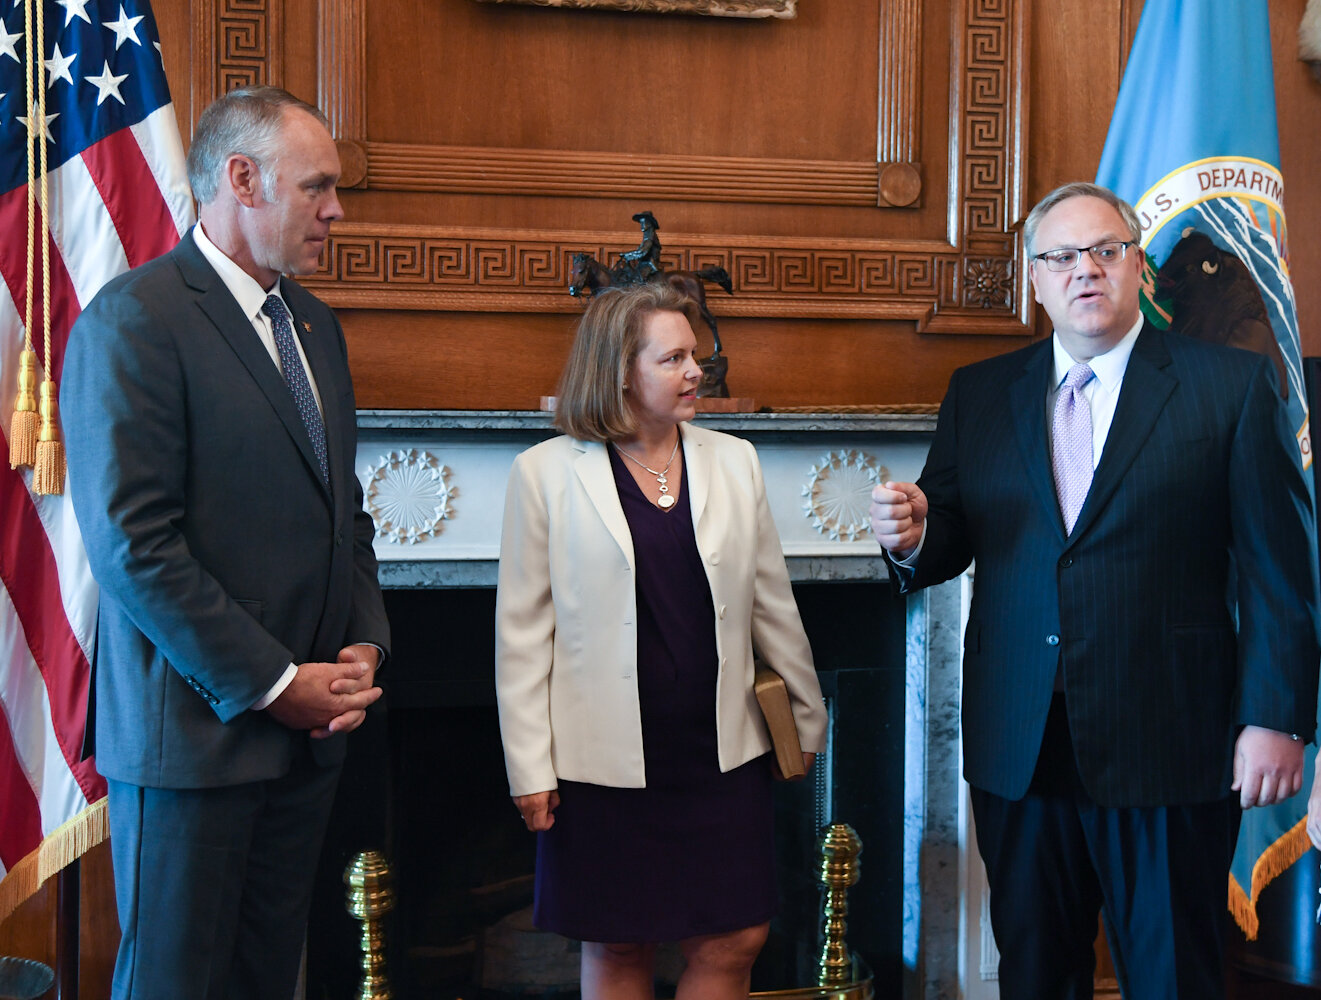 August 1st, 2017. PICTURED: Former Interior Secretary Ryan Zinke (left) stands with newly-sworn in Deputy Sec., and now current Interior Secretary David Bernhardt (right).